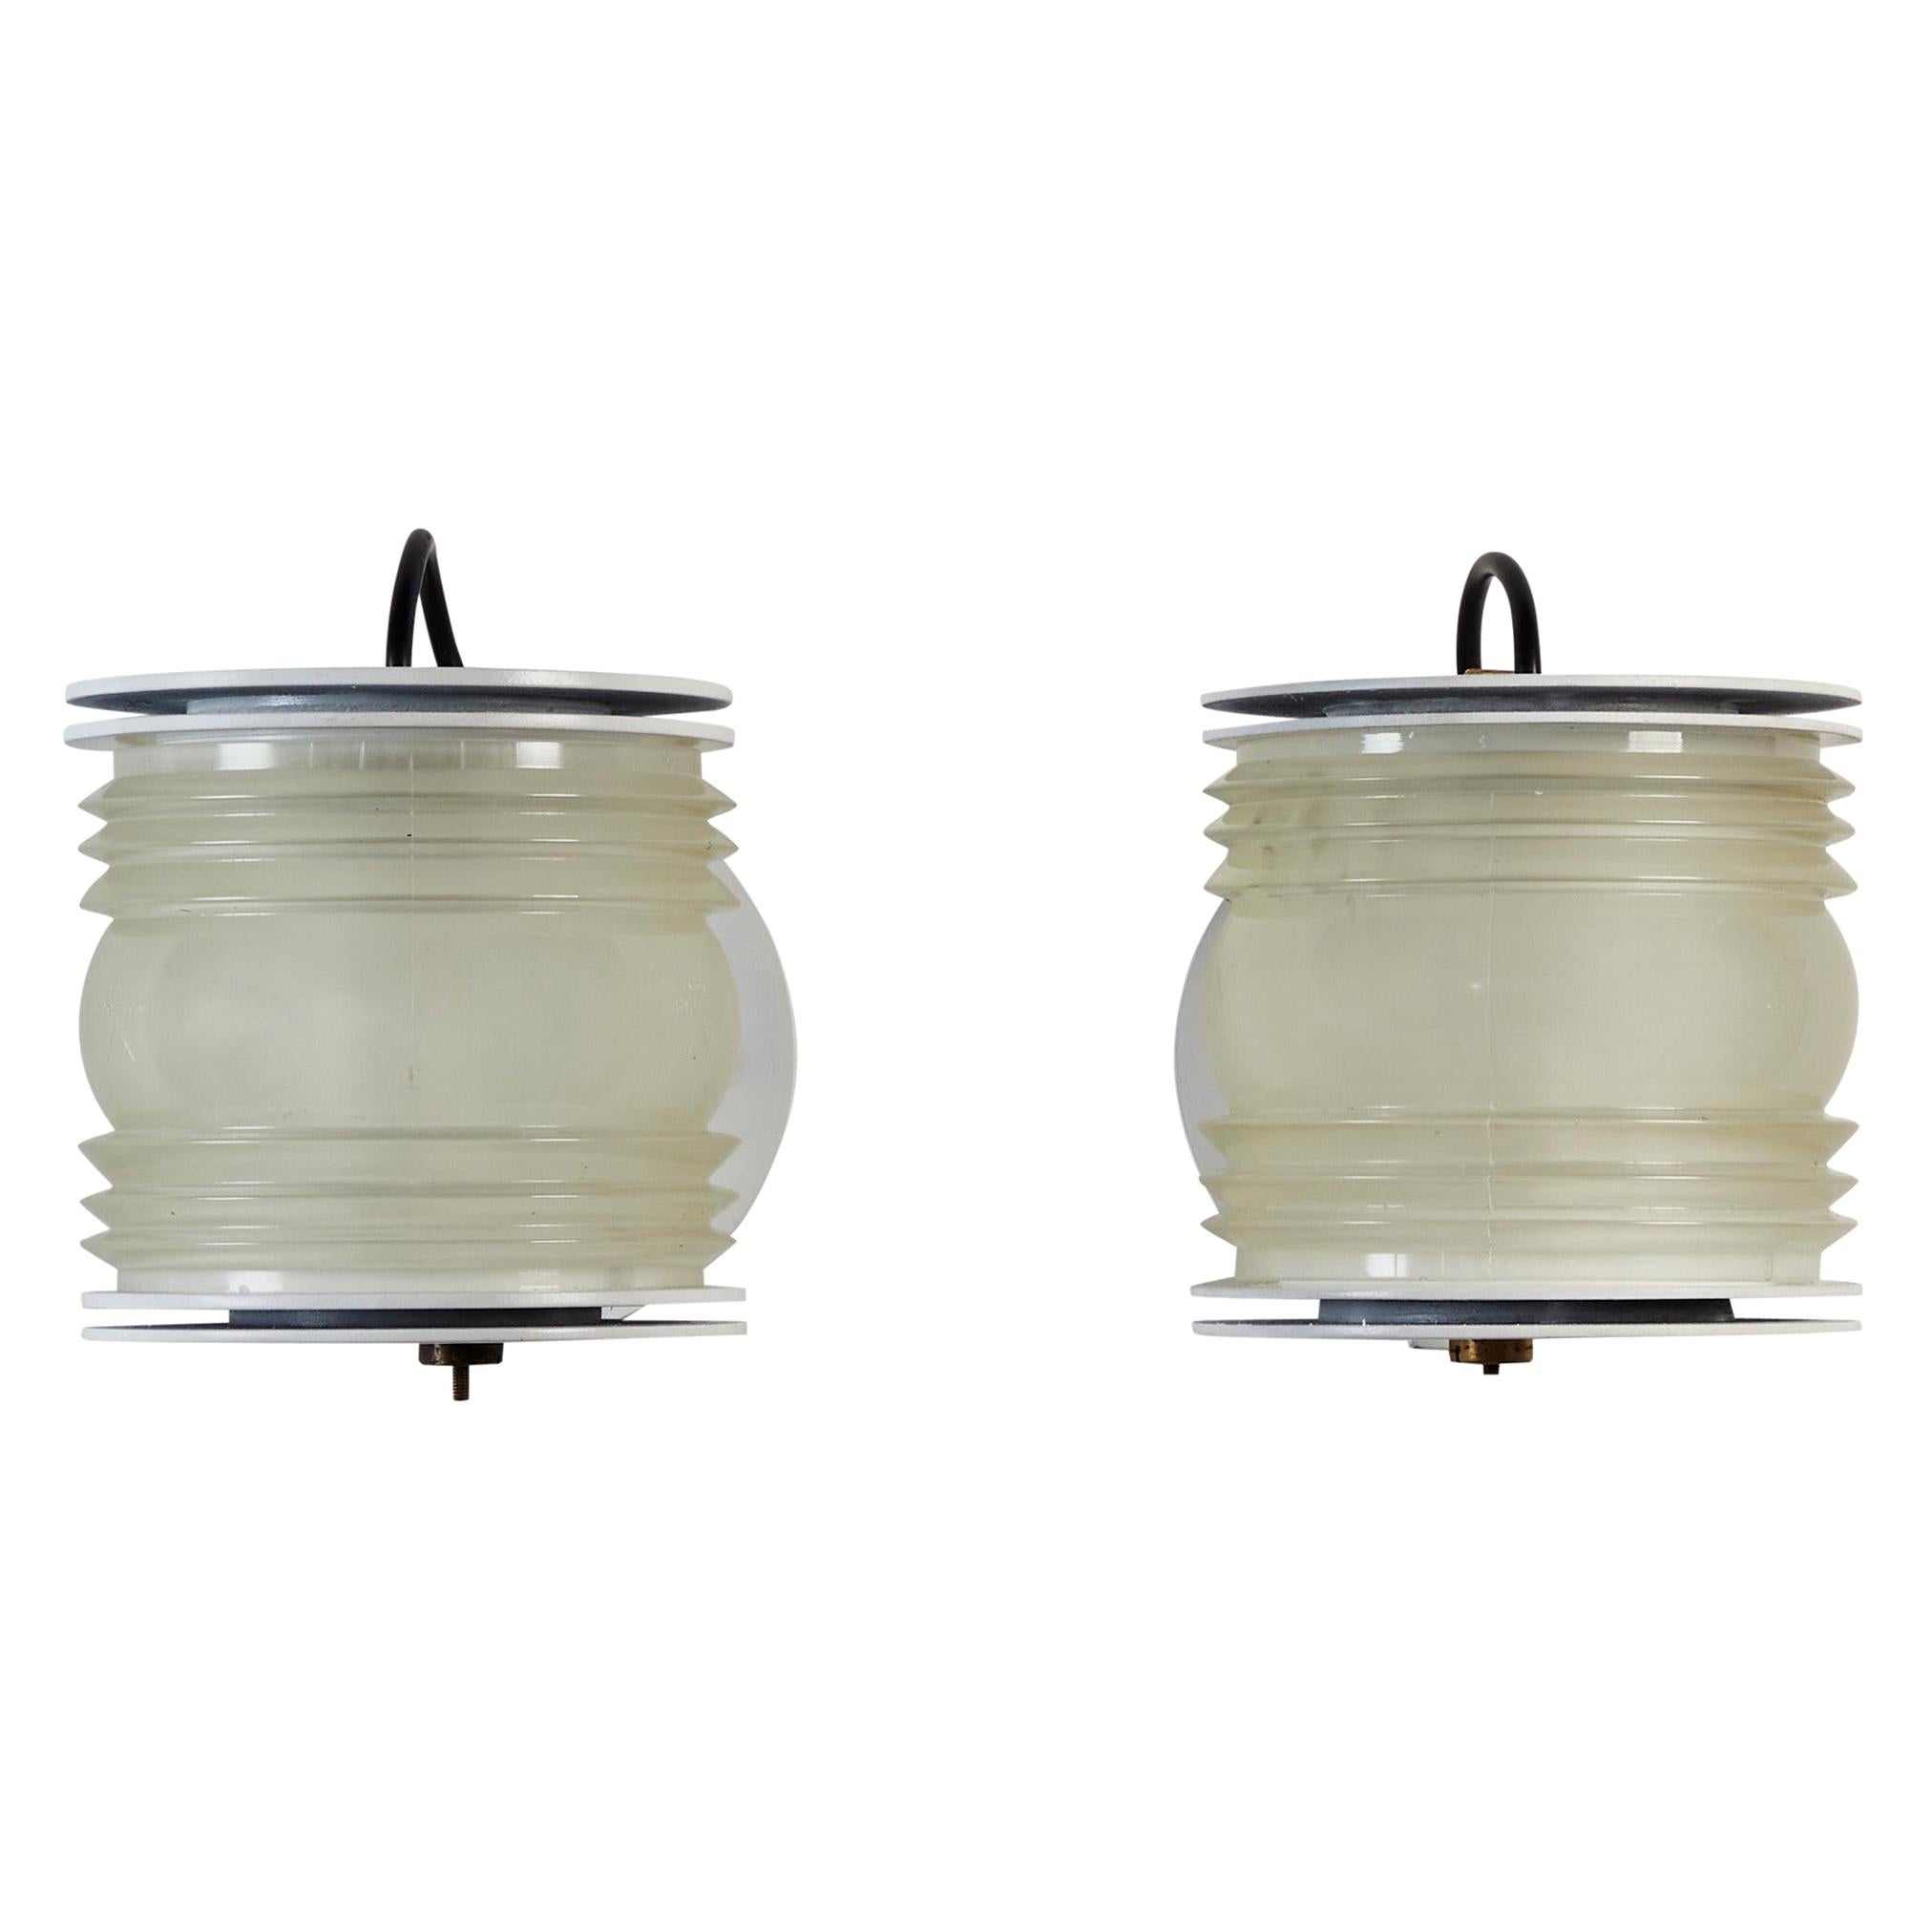 Pair of "Fresnel" Sconces by Joe Colombo for Oluce